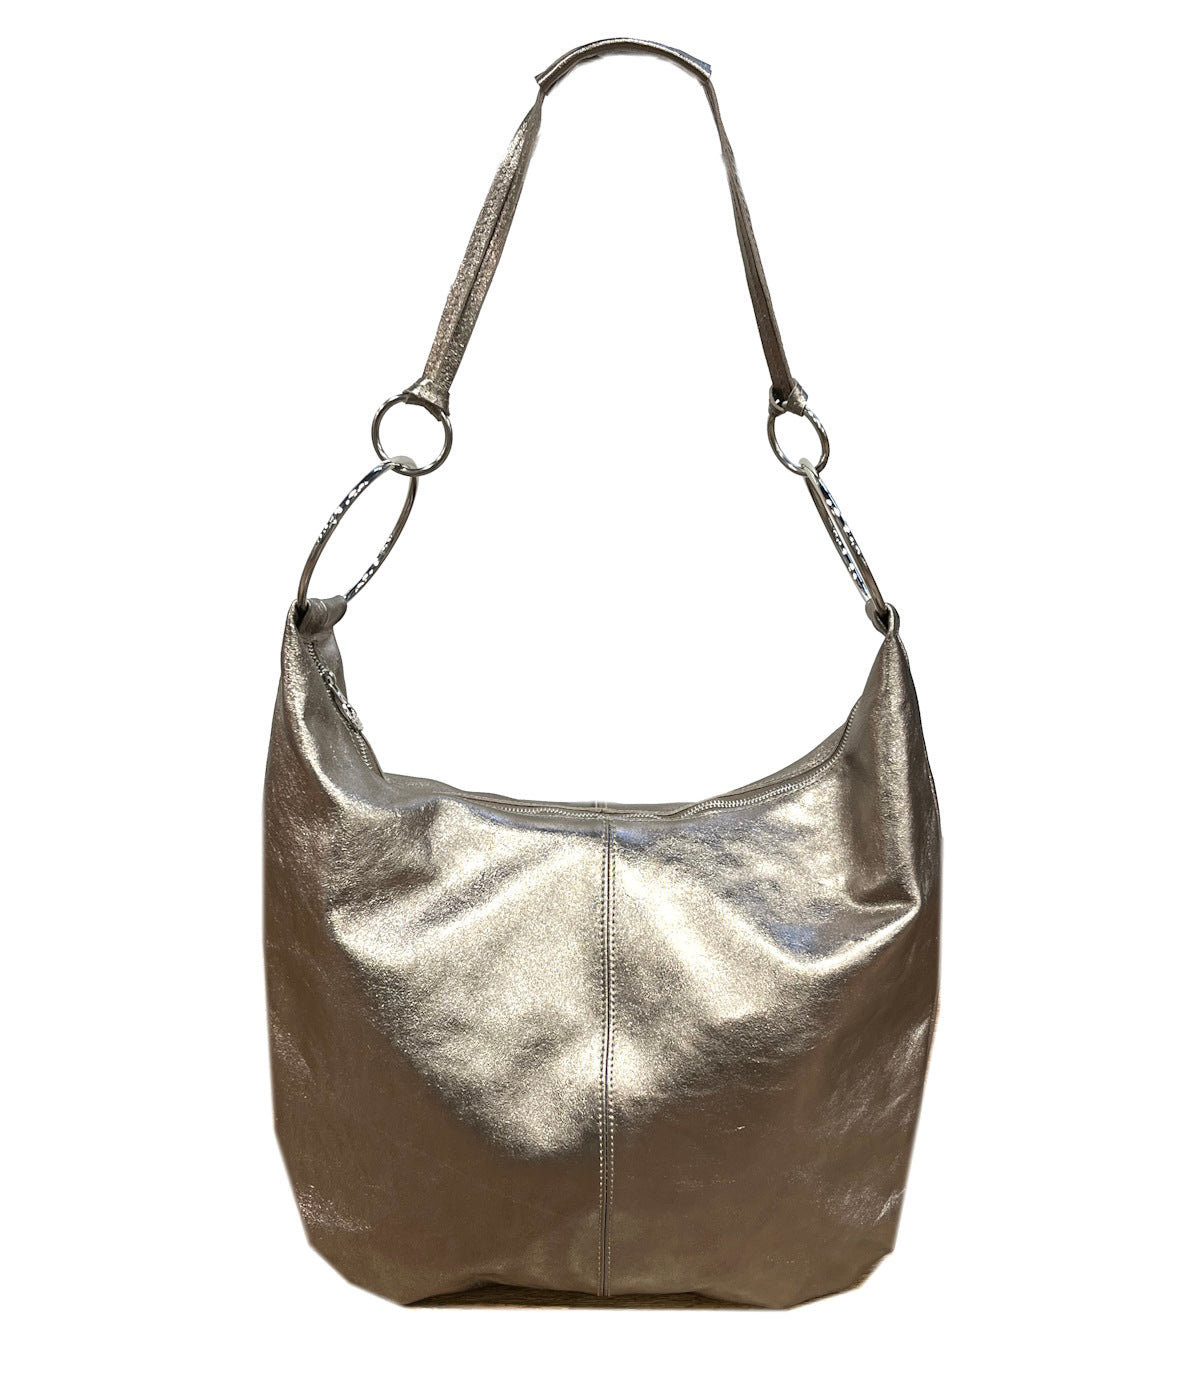 Genuine leather shoulder bag, for women, Made in Italy, art. 112441